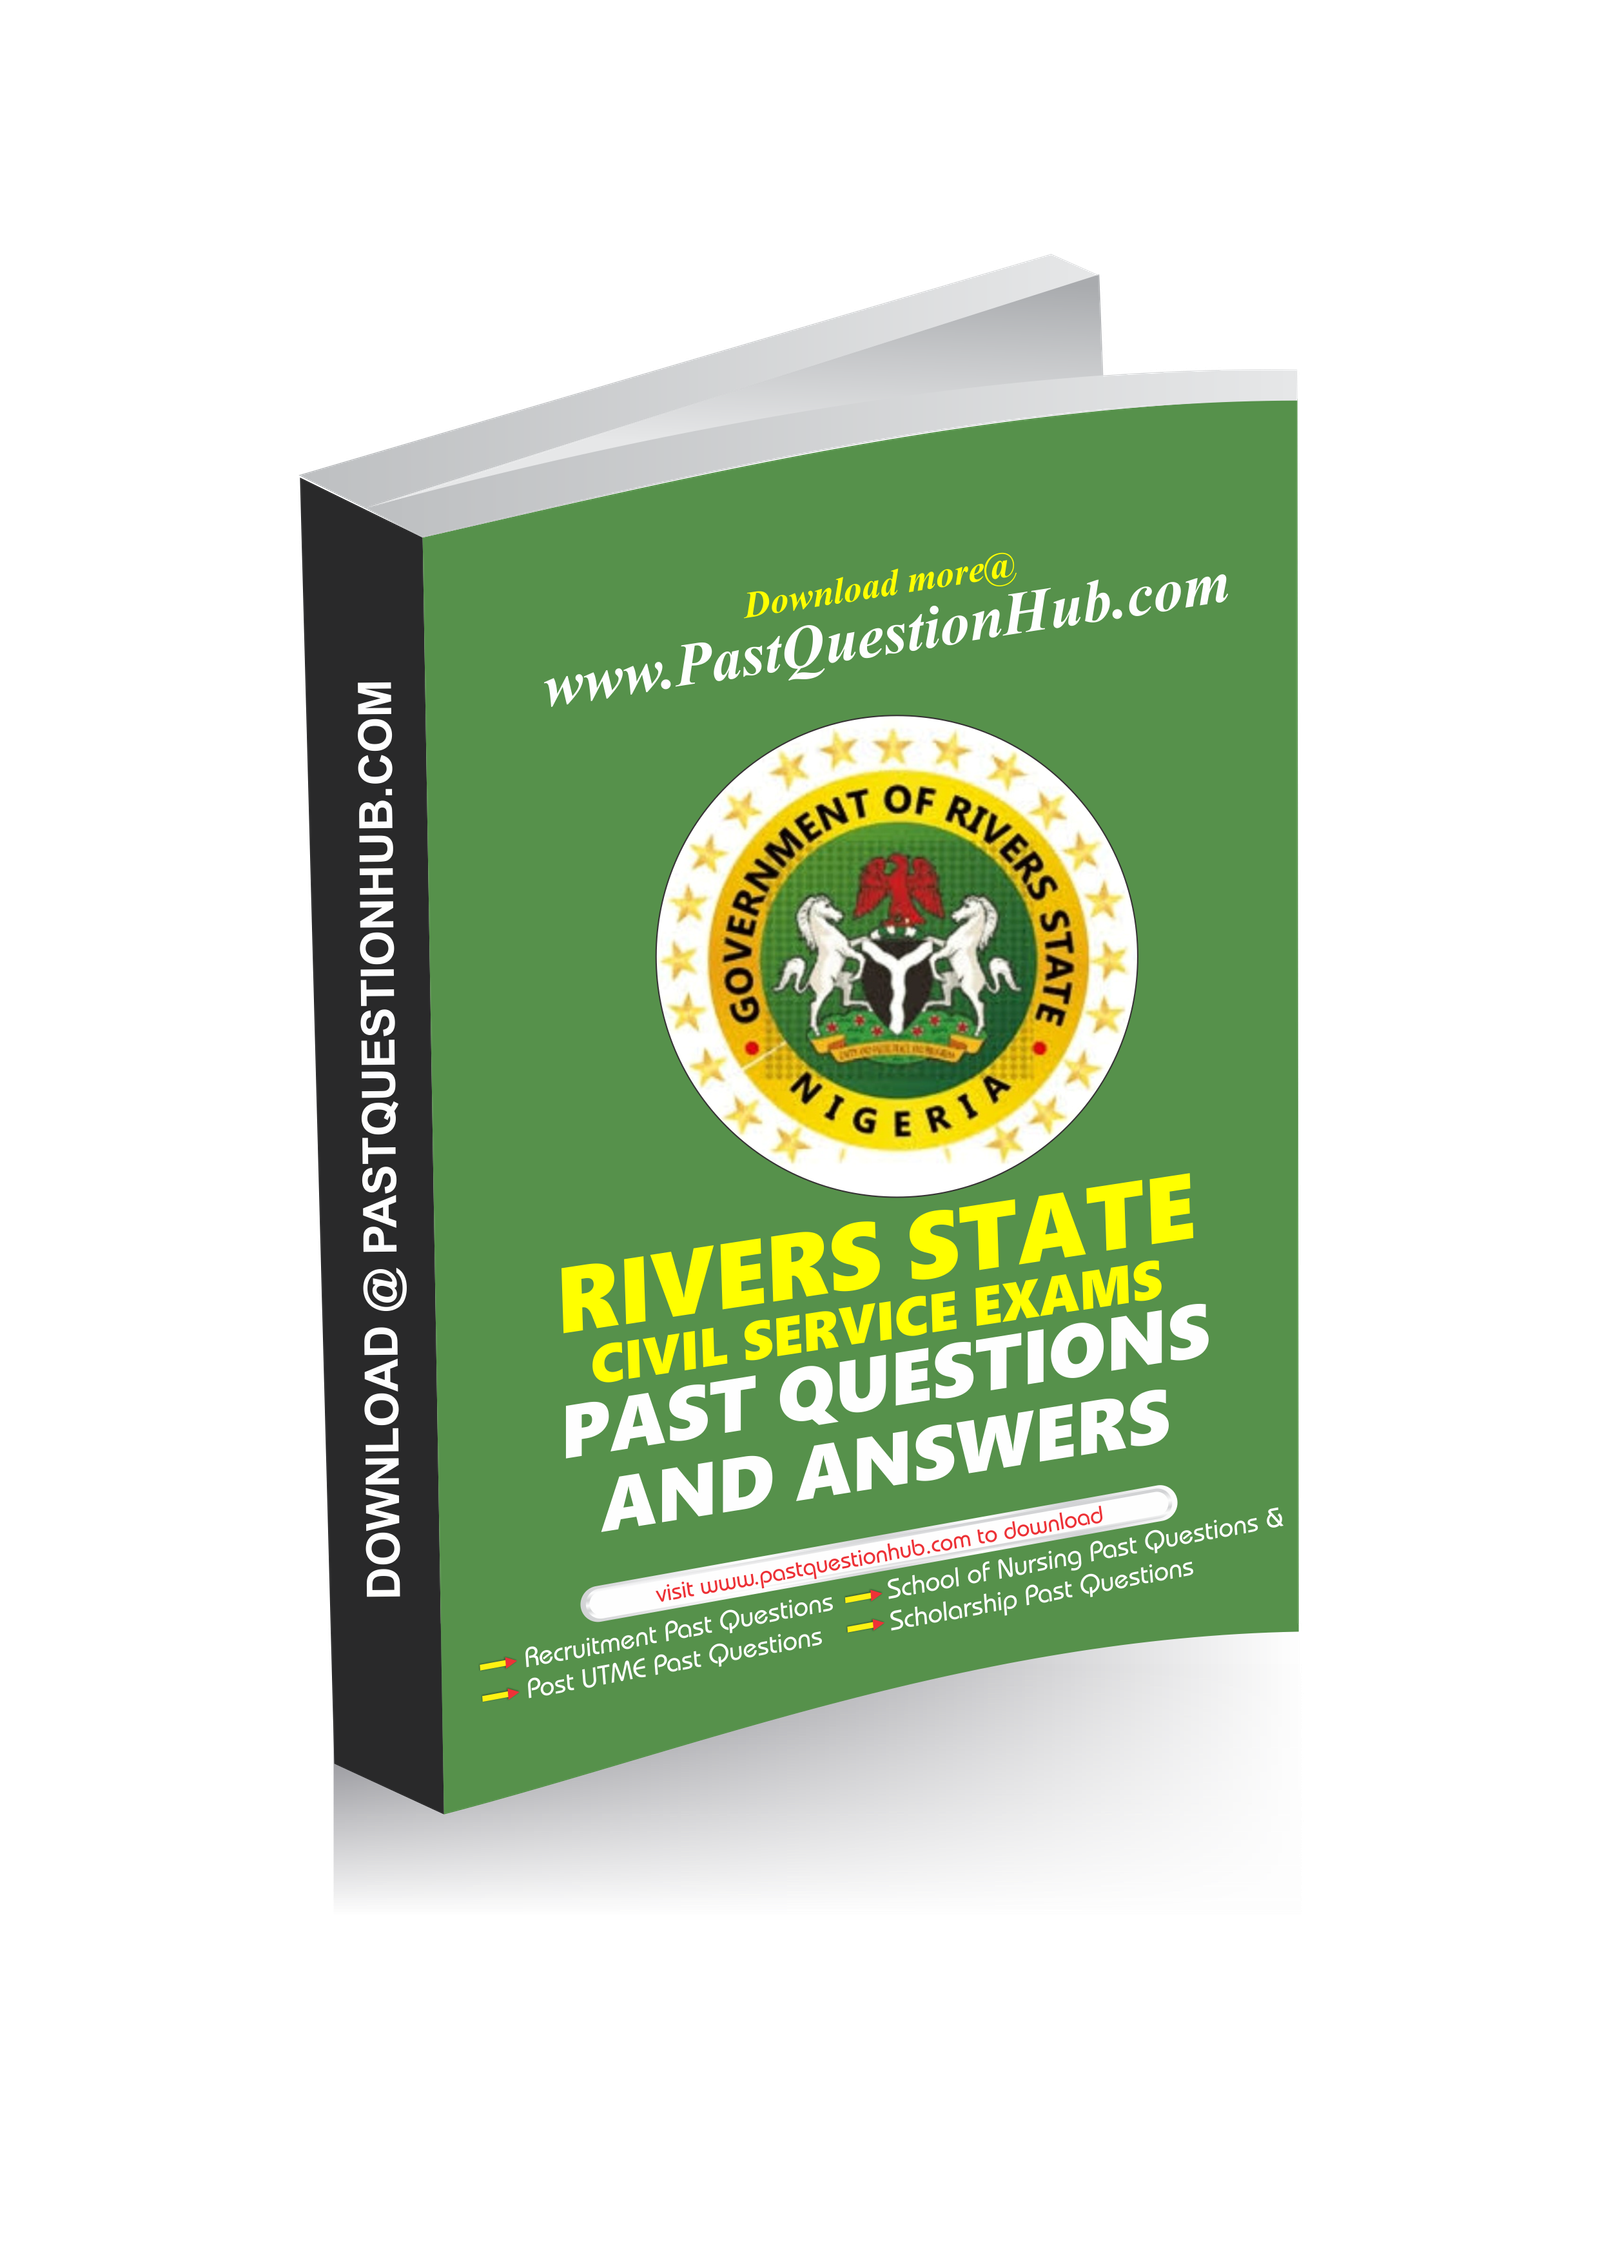 Rivers State Civil Service Past Questions